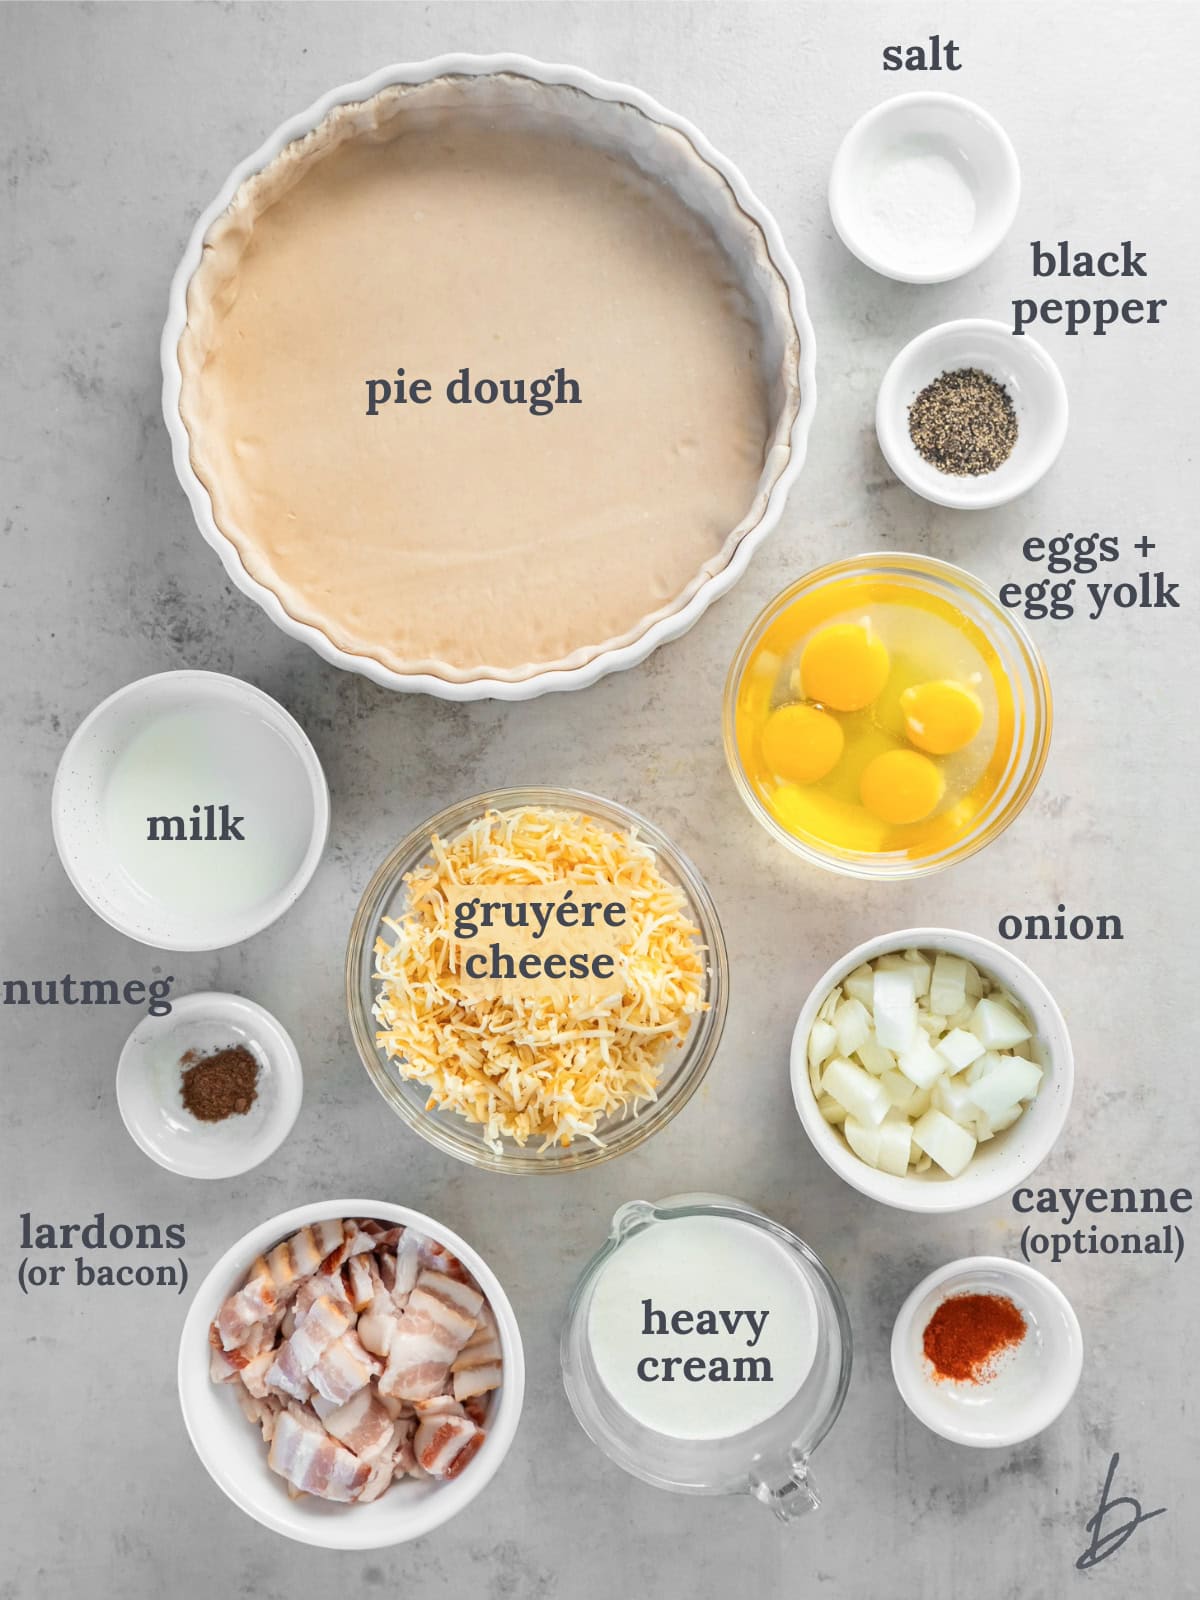 quiche lorraine ingredients in bowls on a tabletop.